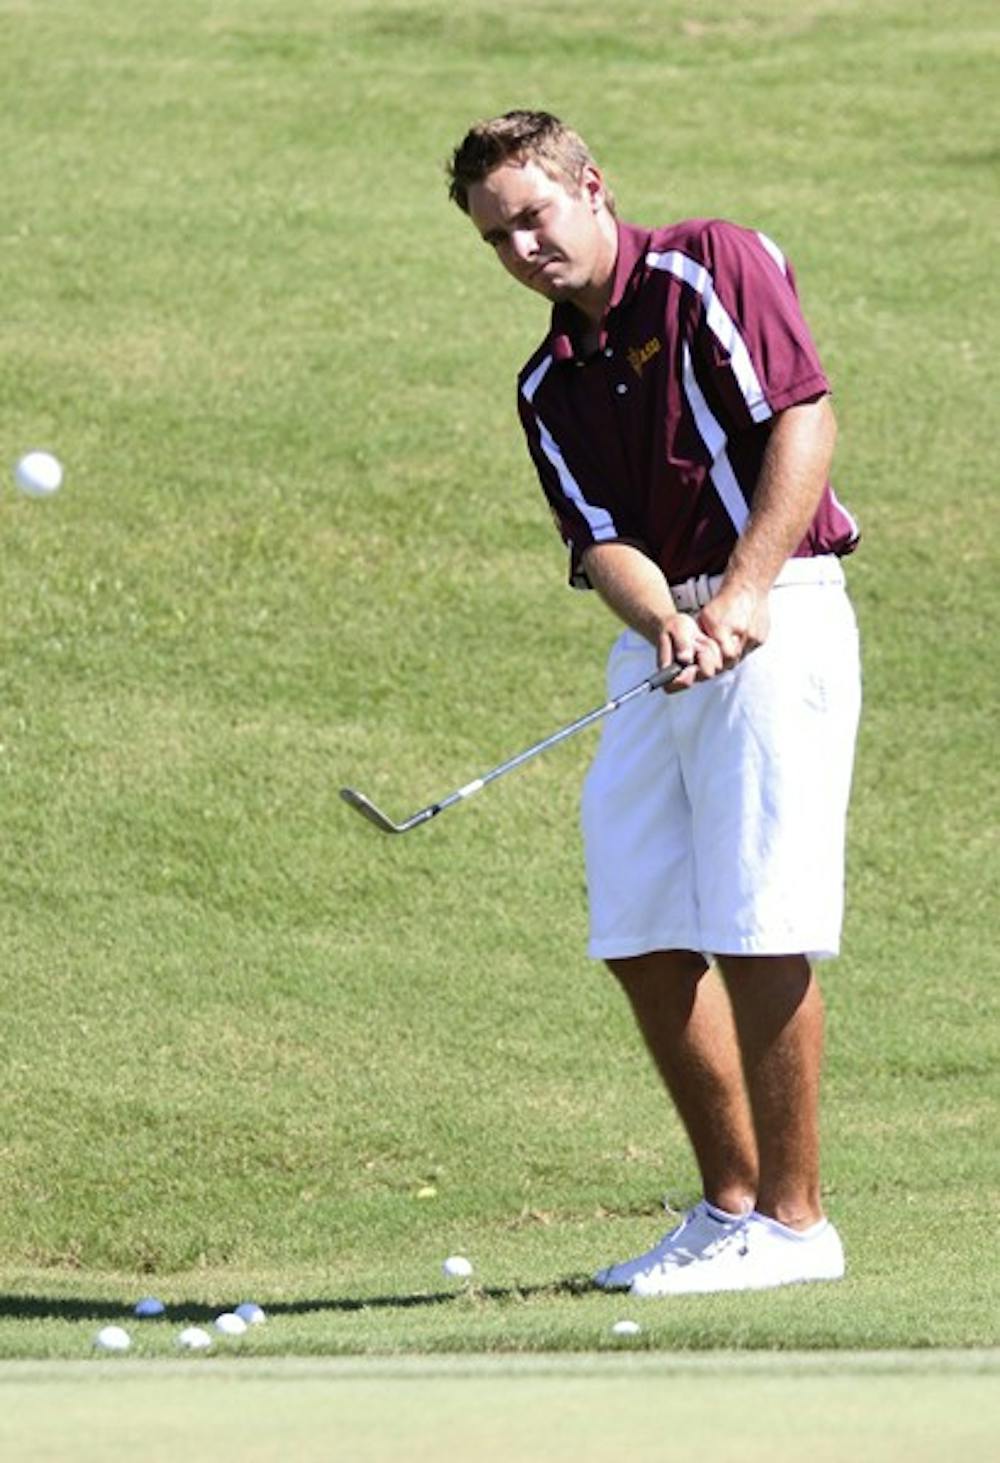 Sophomore Austin Quick chips away during an ASU golf practice. Quick knew after winning a tournament at Karsten in high school that he wanted to play golf at ASU. (Photo by Kyle Newman)